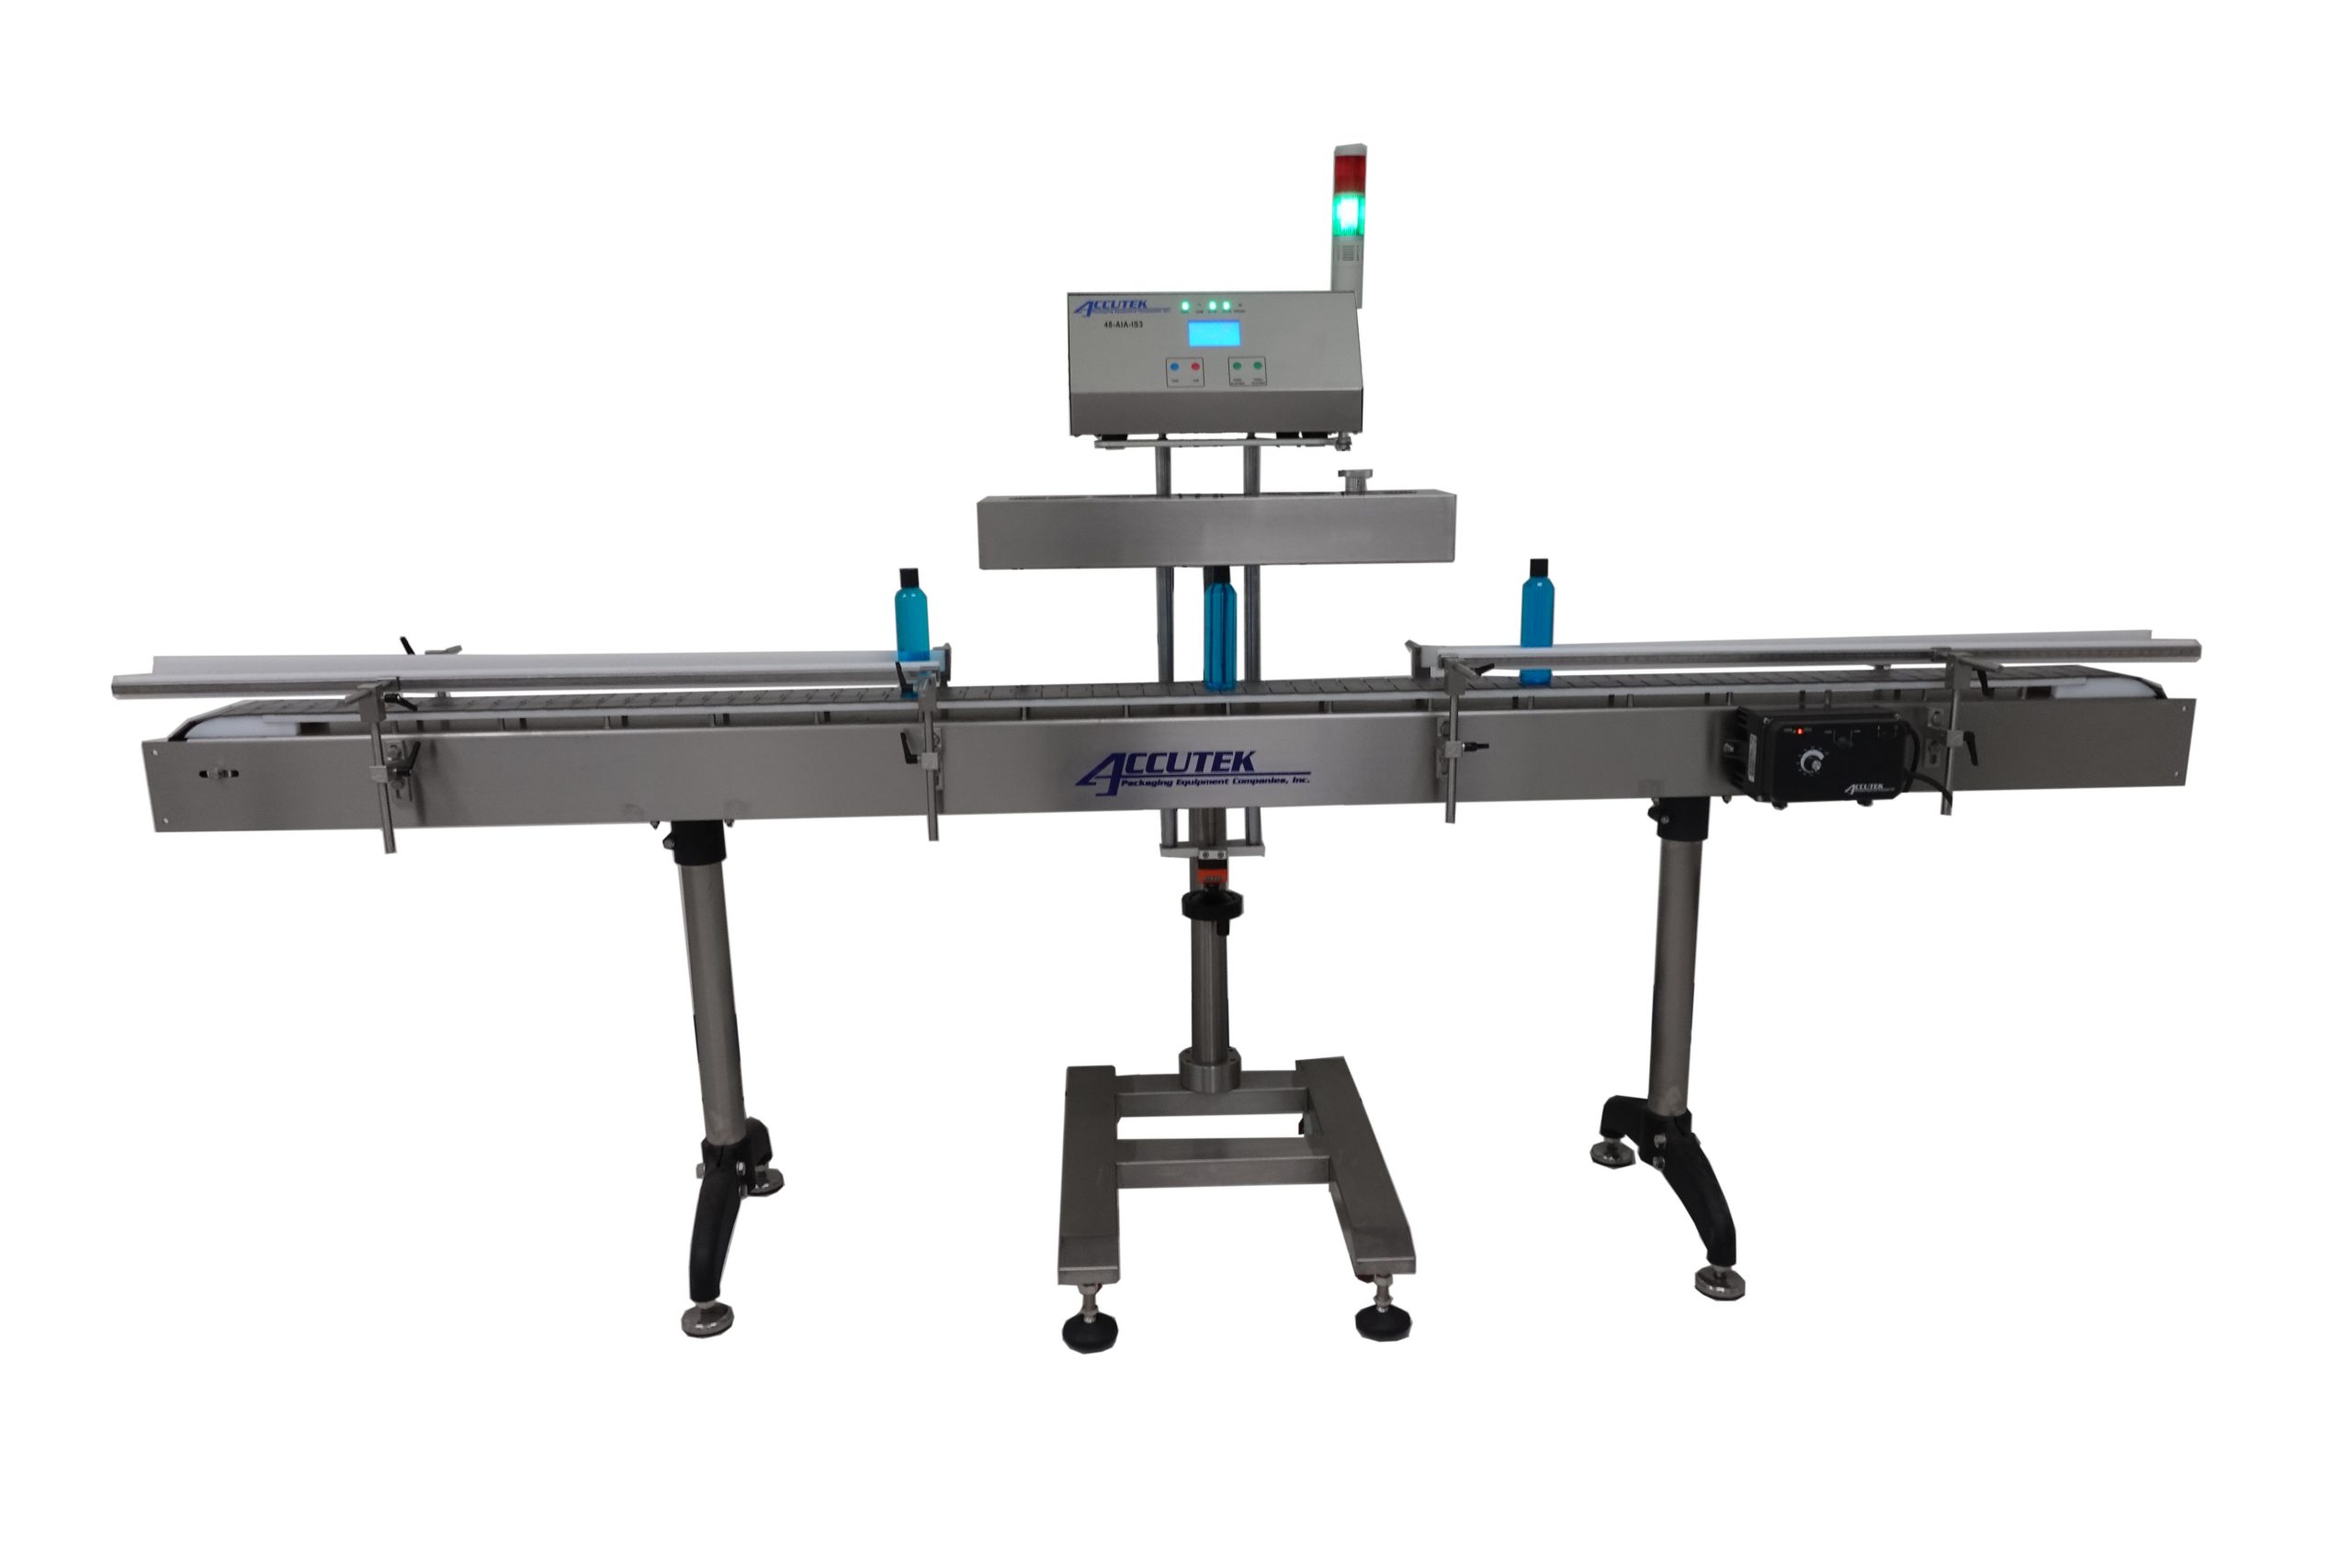 Induction sealer secures products & contracts